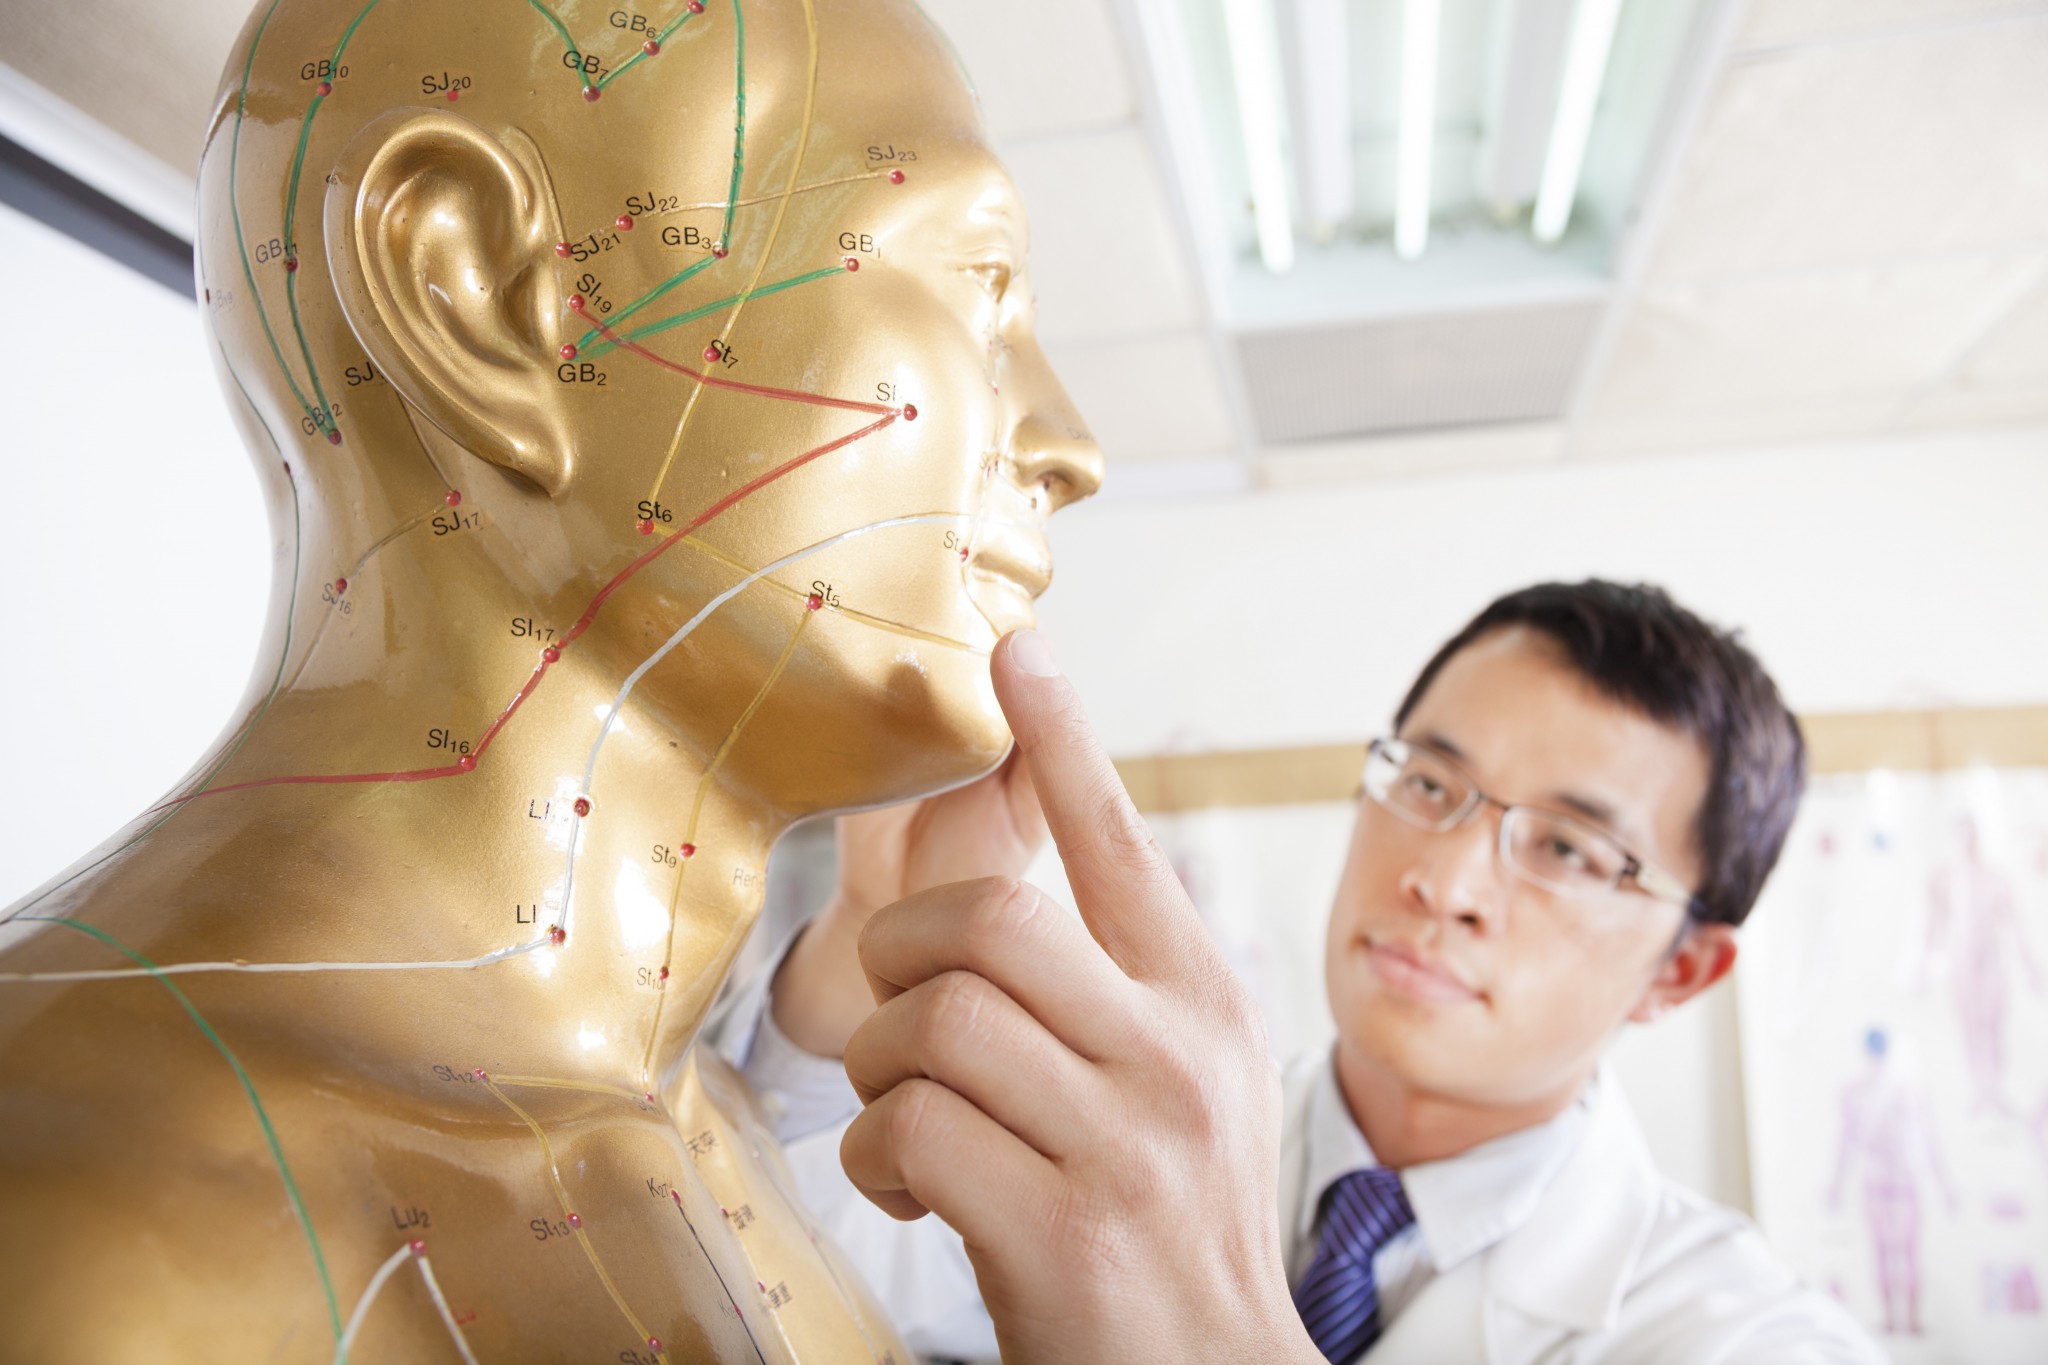 Interest in studying Traditional Chinese Medicine on the rise among international students